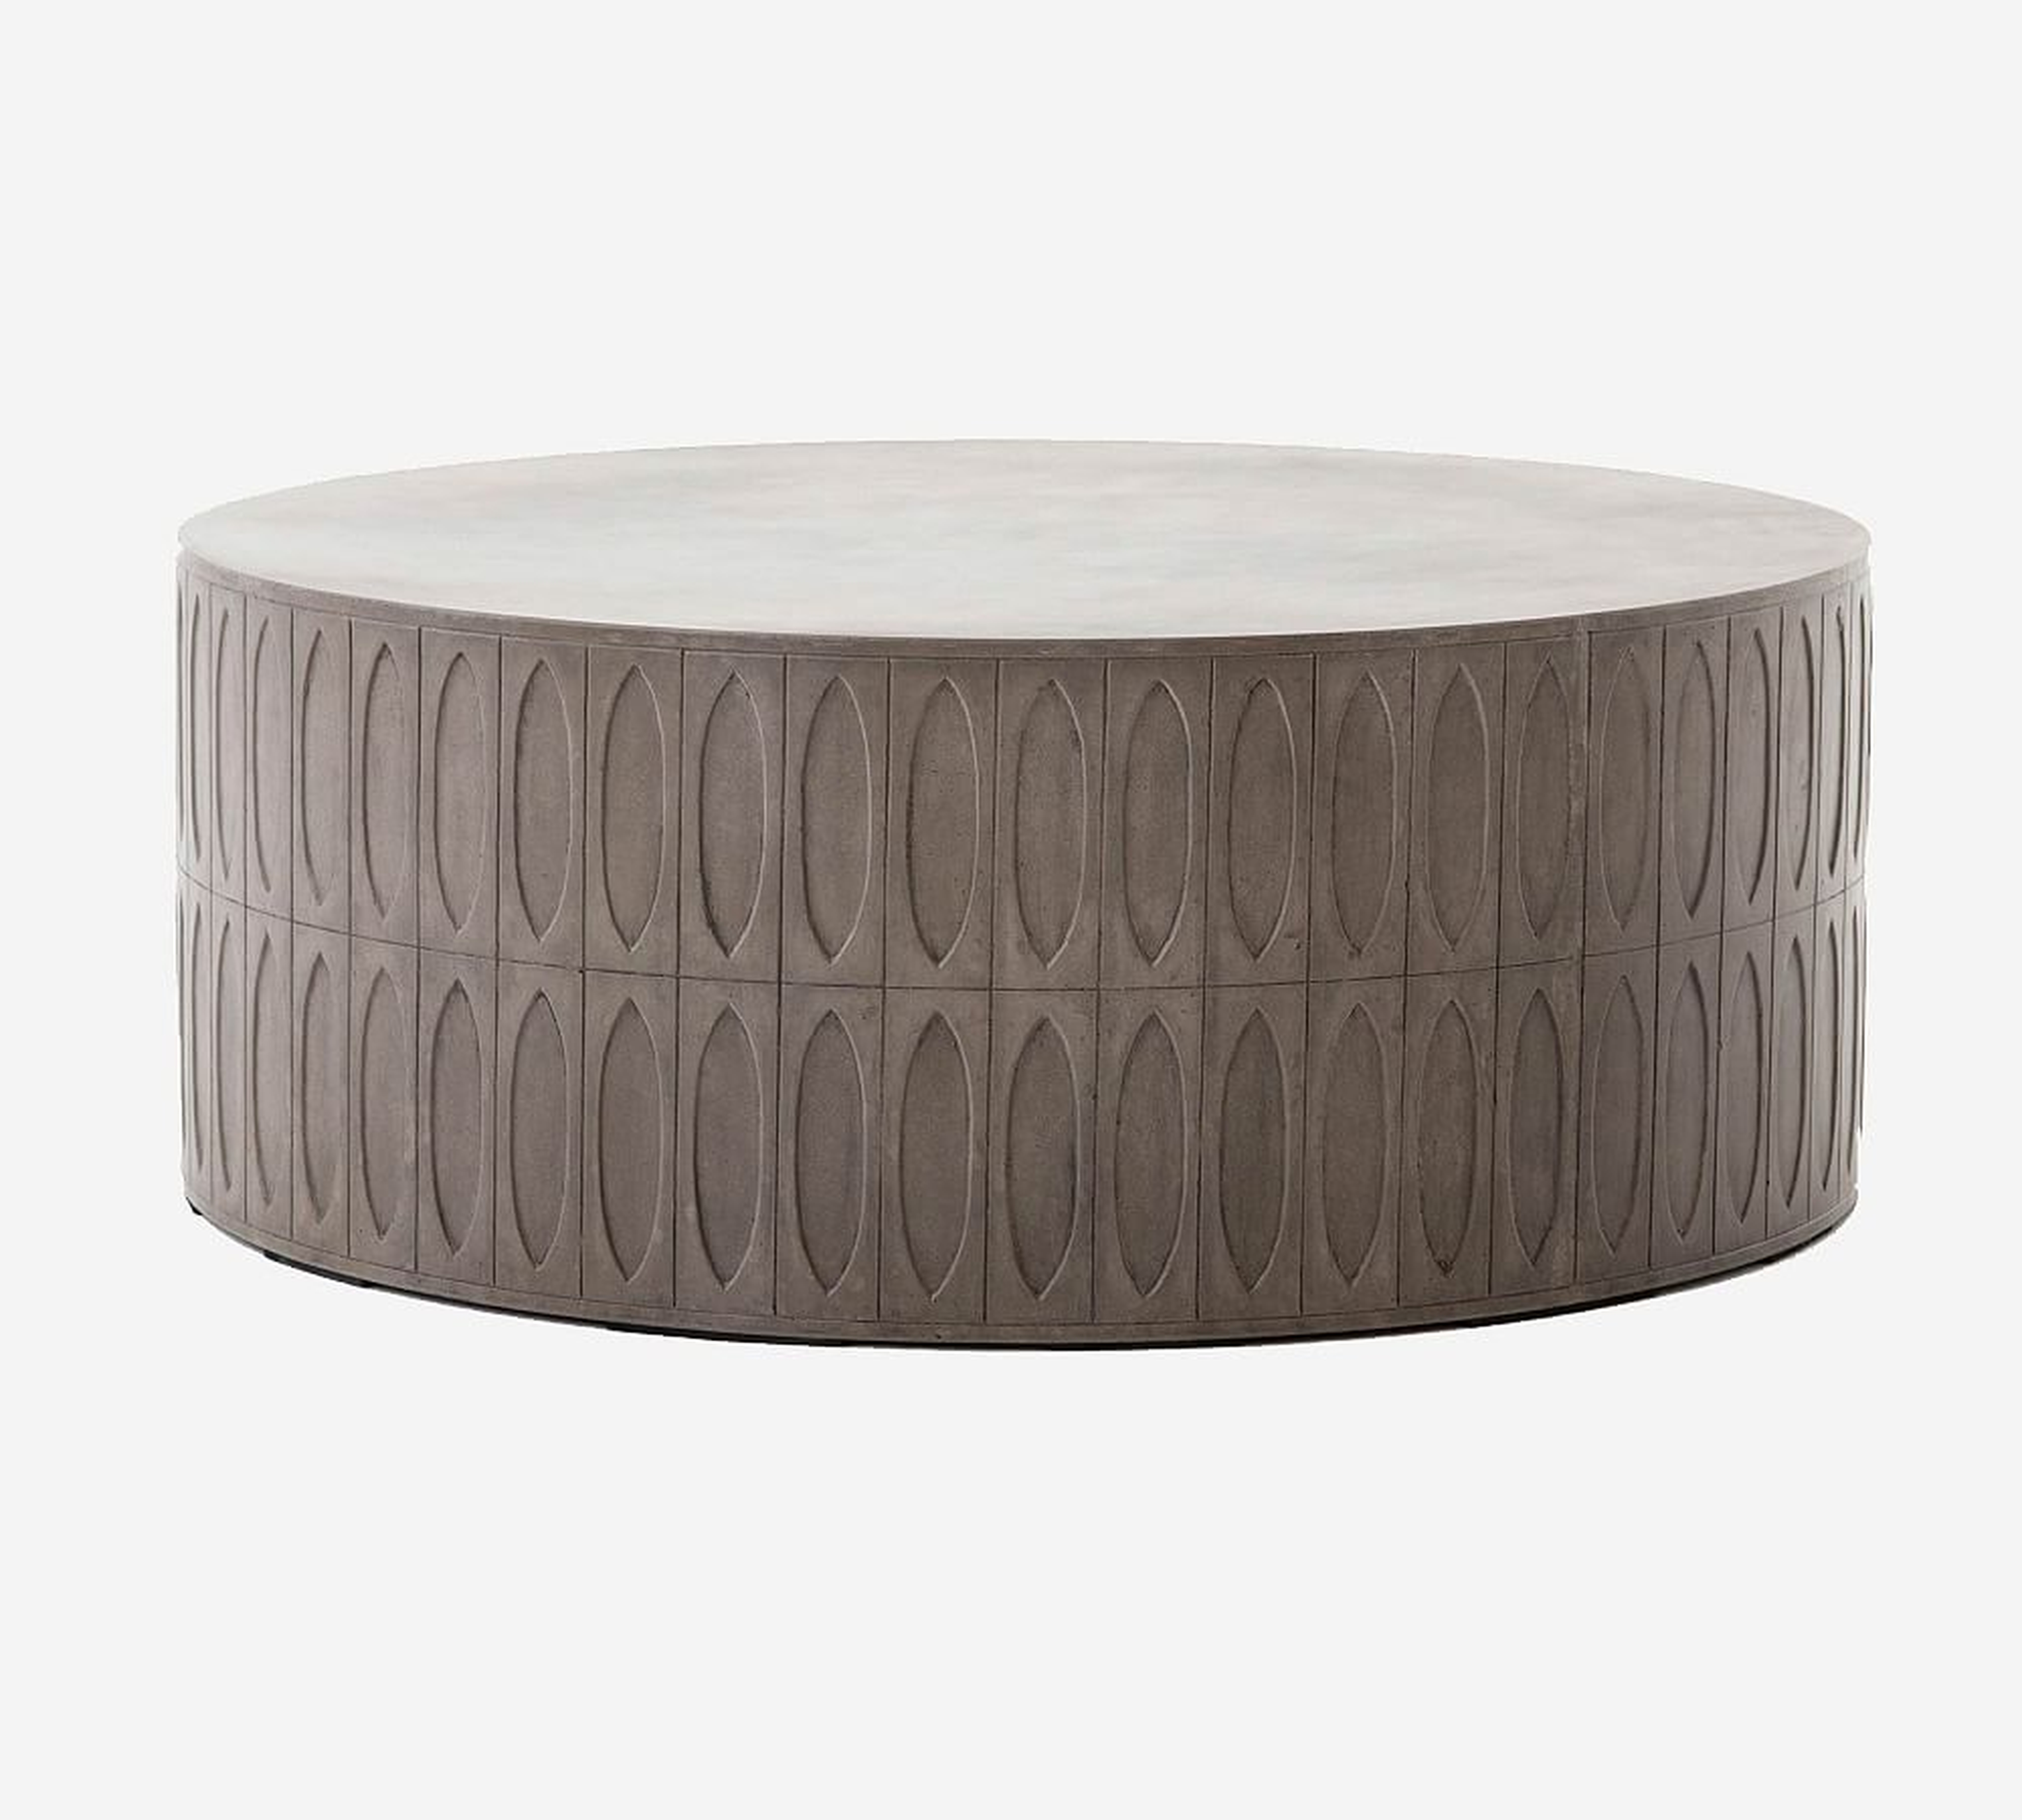 Woolf Concrete Round Coffee Table, Gray - Pottery Barn